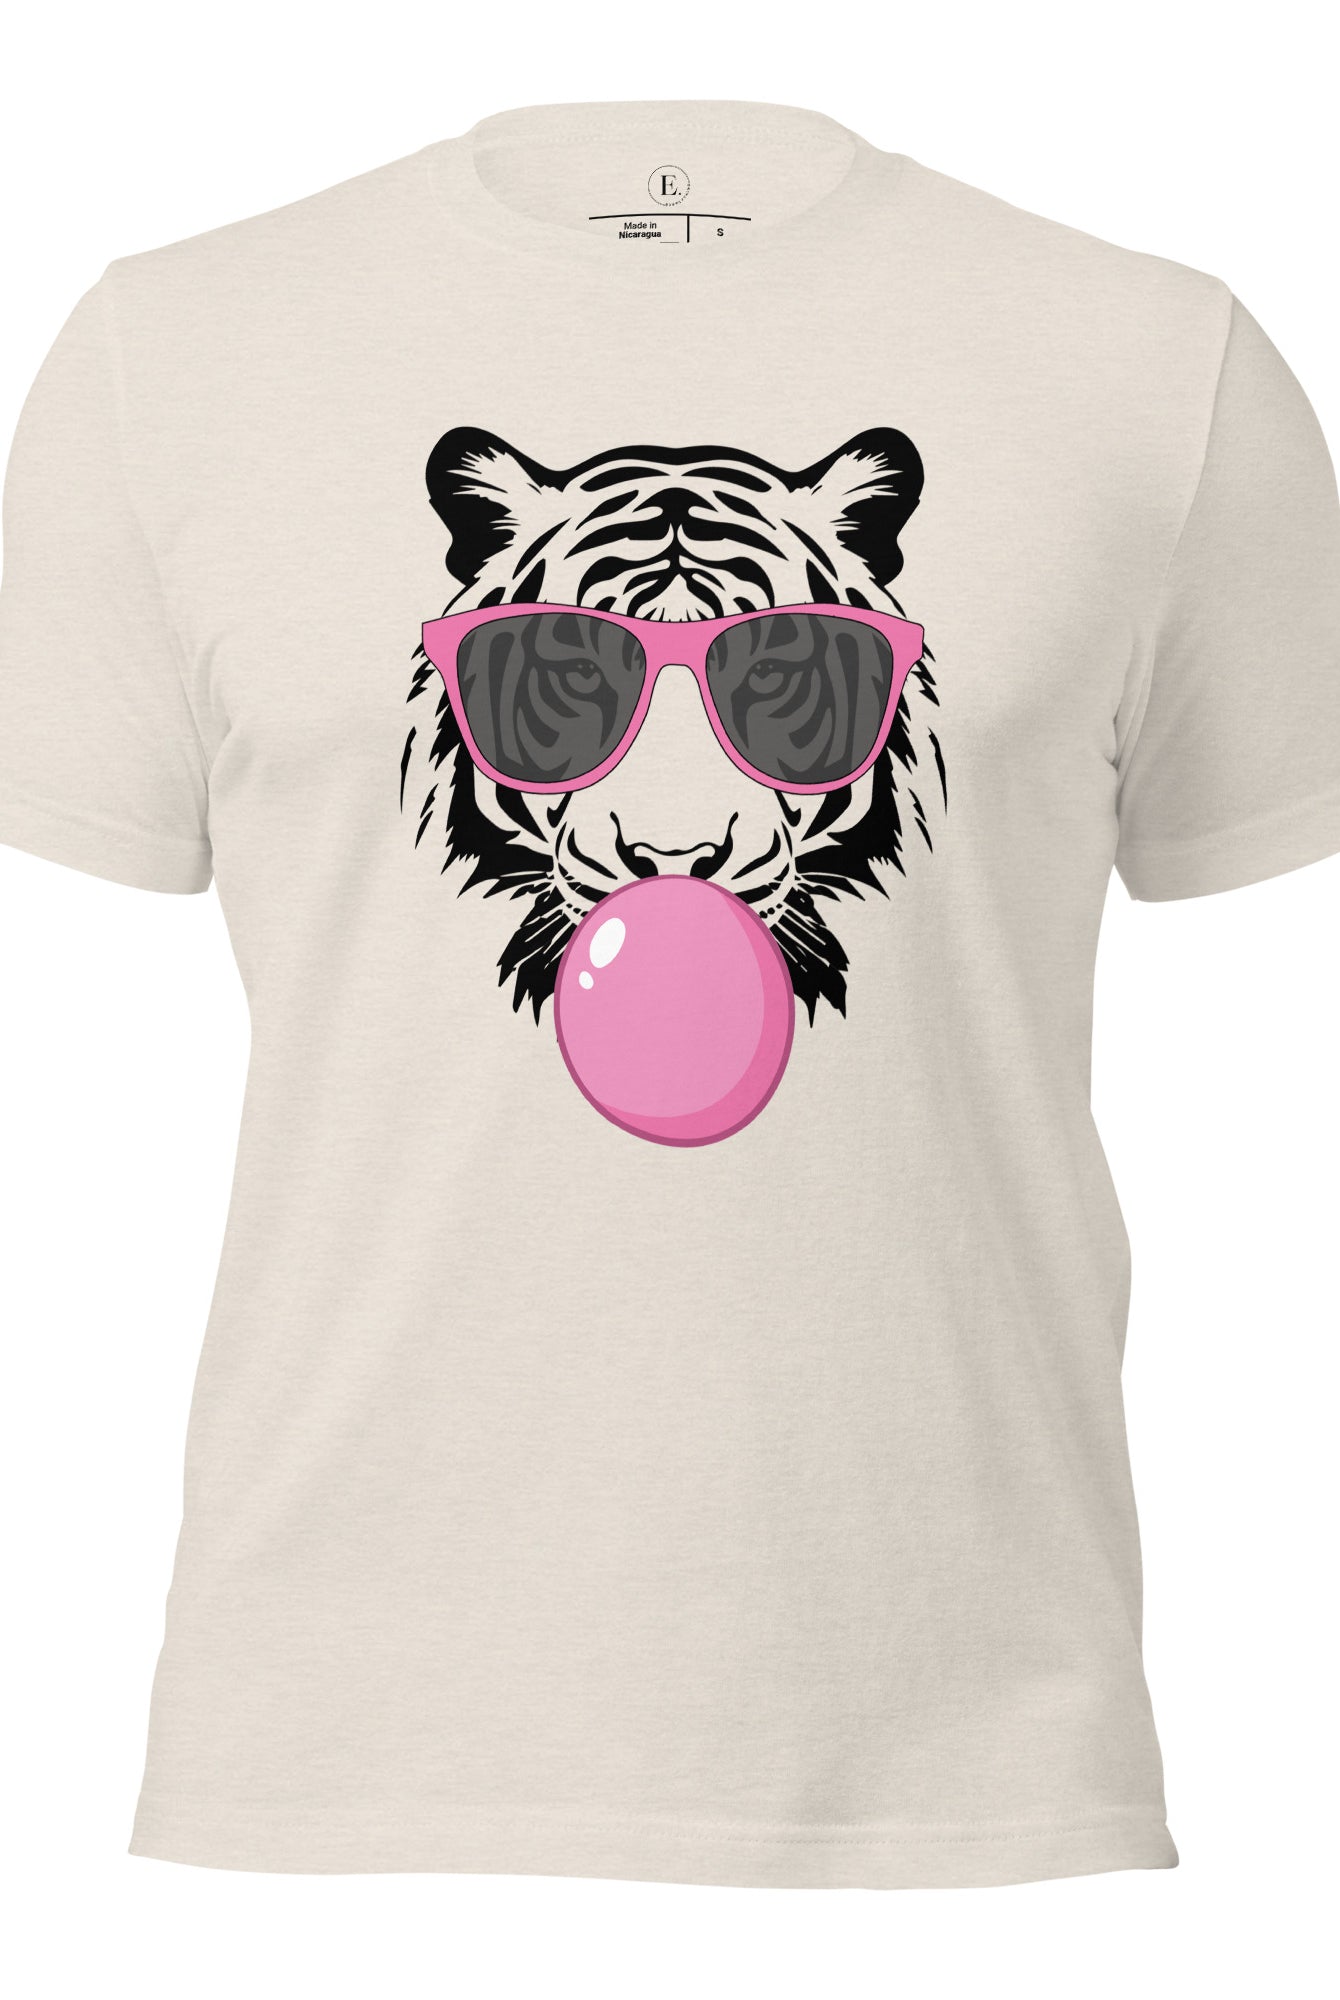 Bubble blowing tiger wearing pink sunglasses on a heather dust colored shirt. 